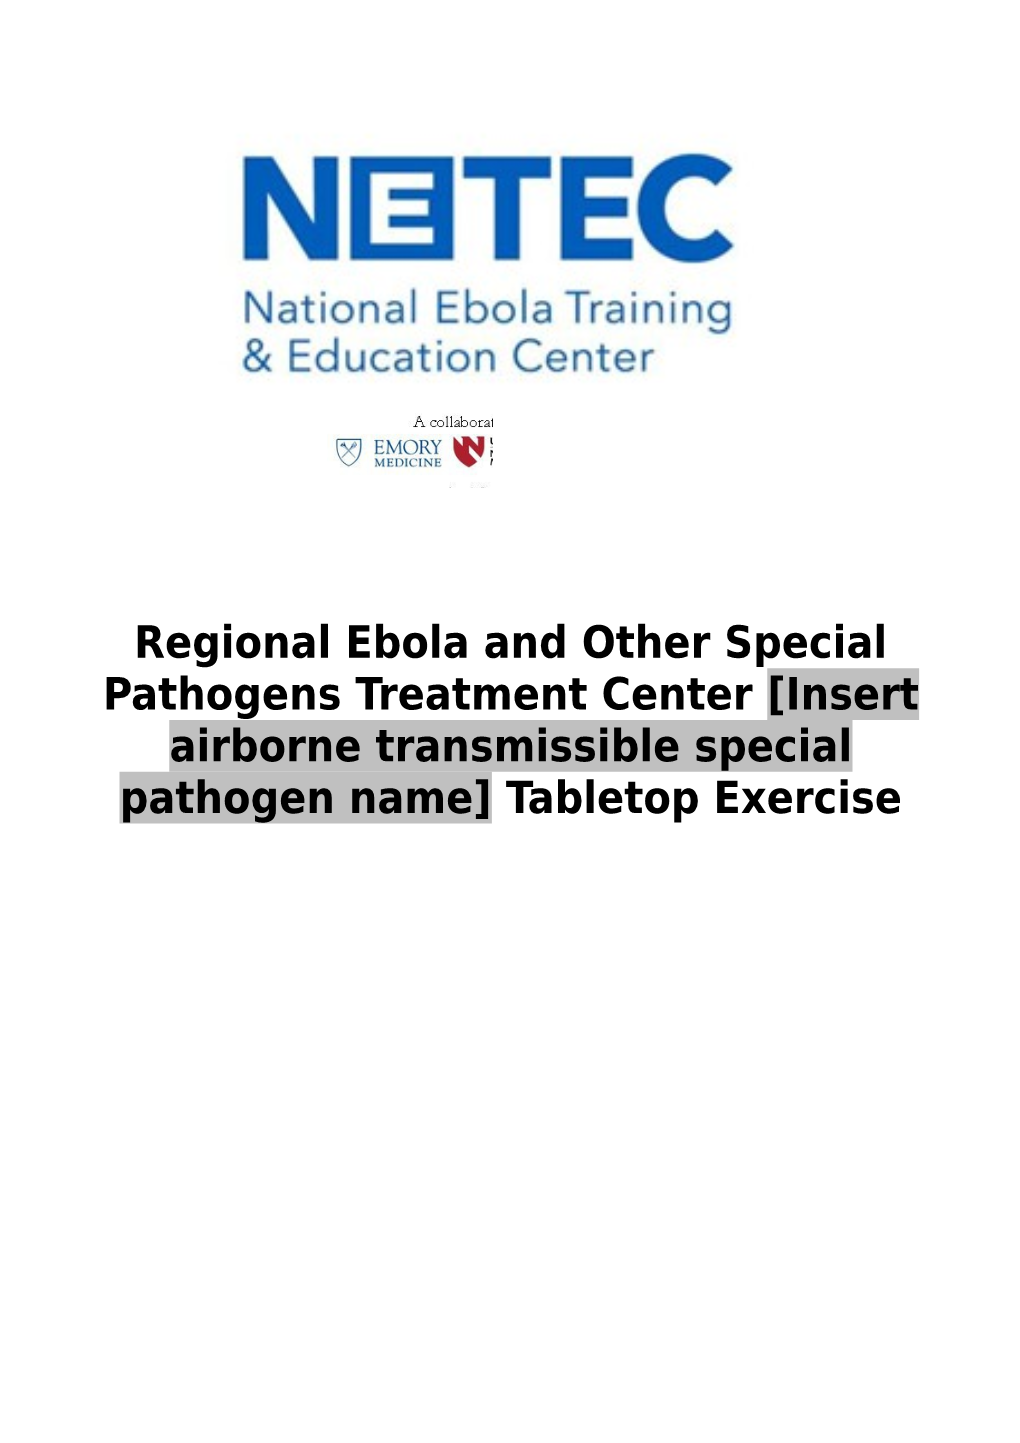 Regional Ebola and Other Special Pathogens Treatment Center Insert Airborne Transmissible